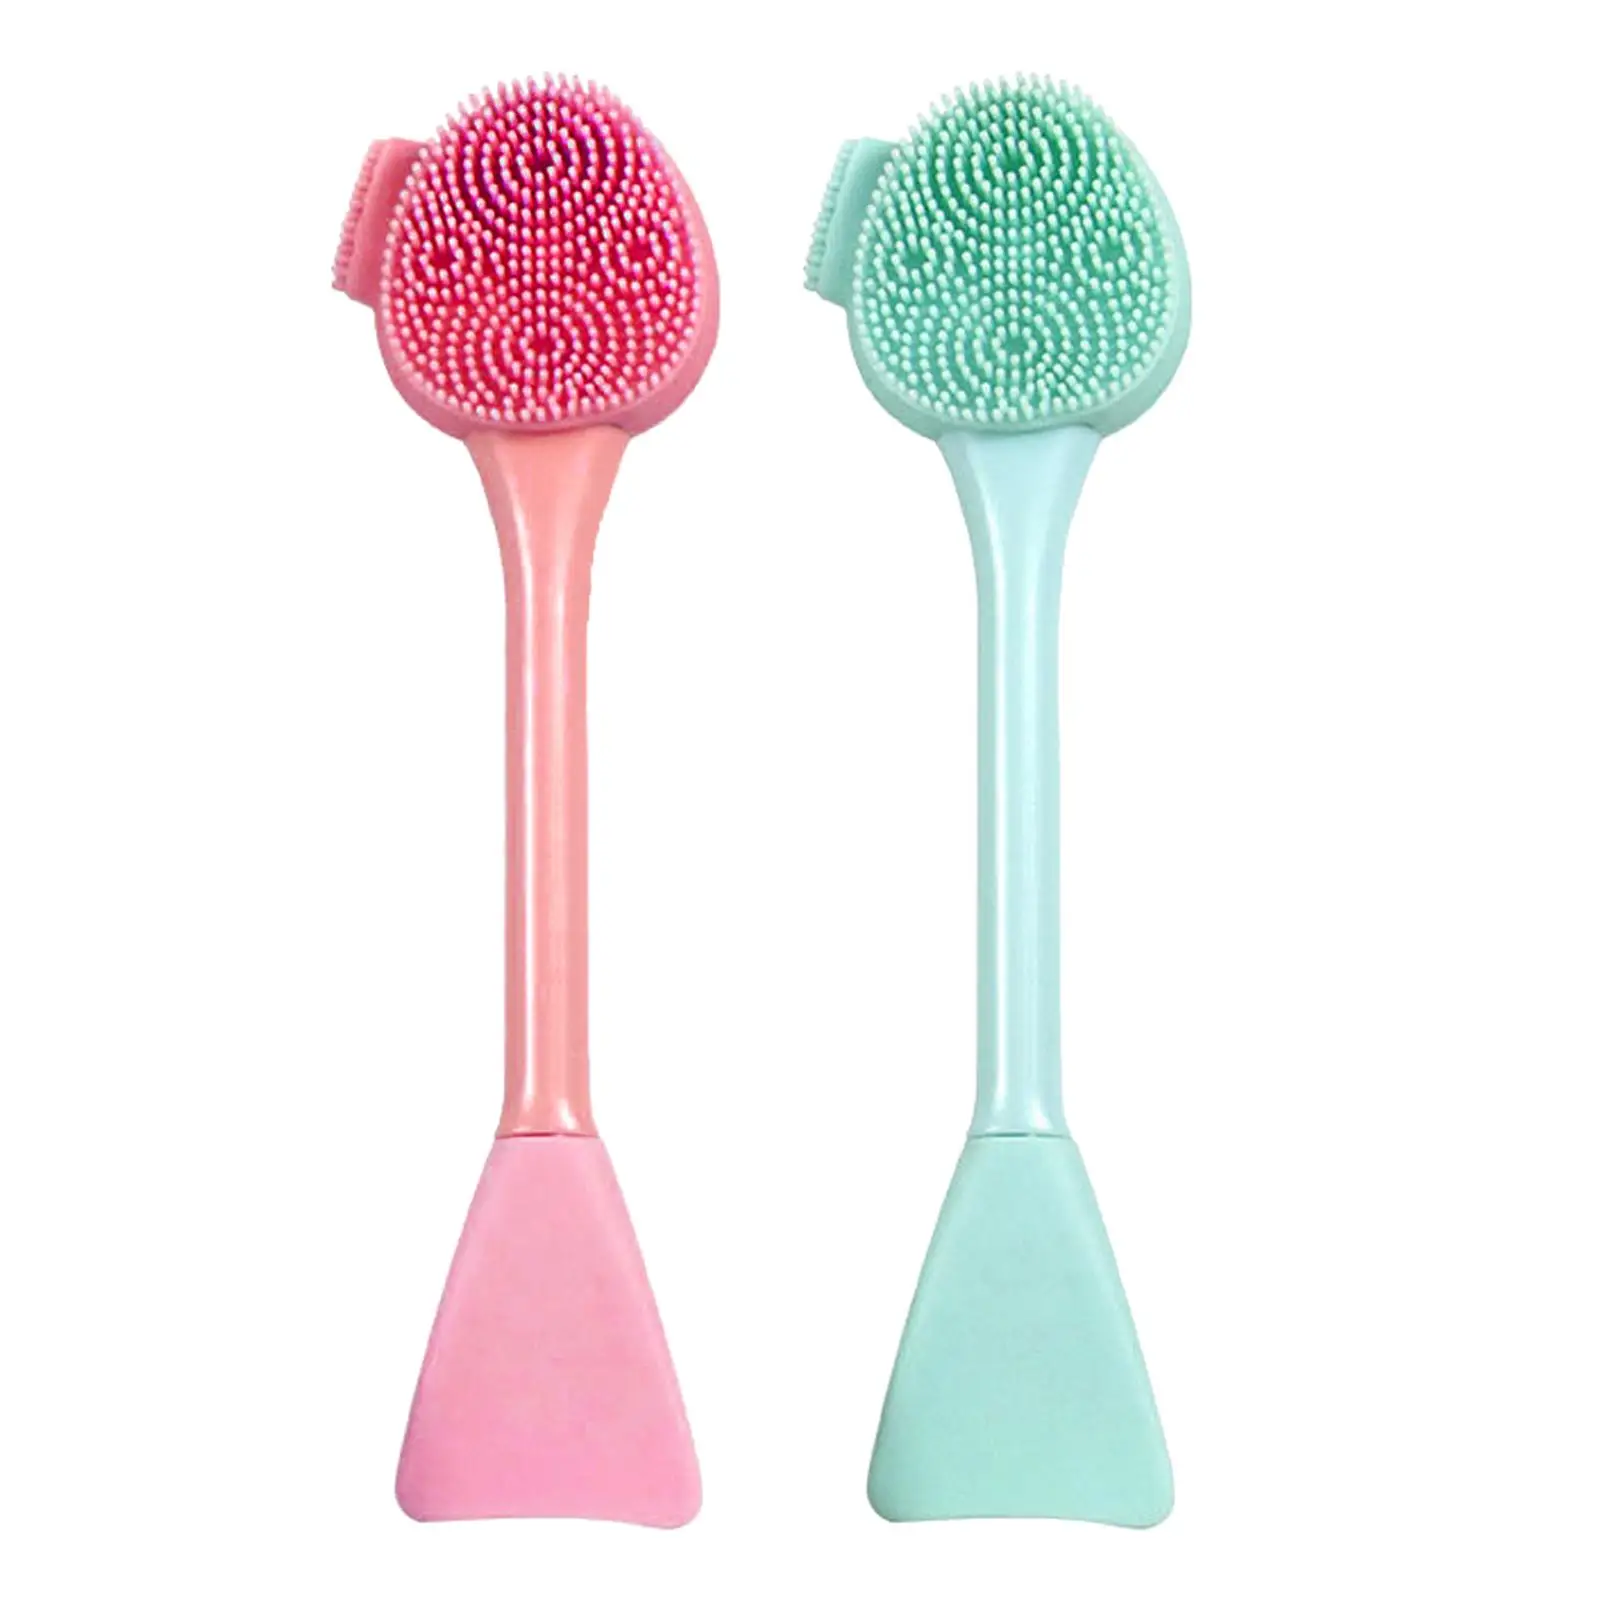 Silicone Face Cleanser Massager Brush Double Ended, Removing Blackhead for Women Easy to Grip Cleansing Exfoliating Skin Care